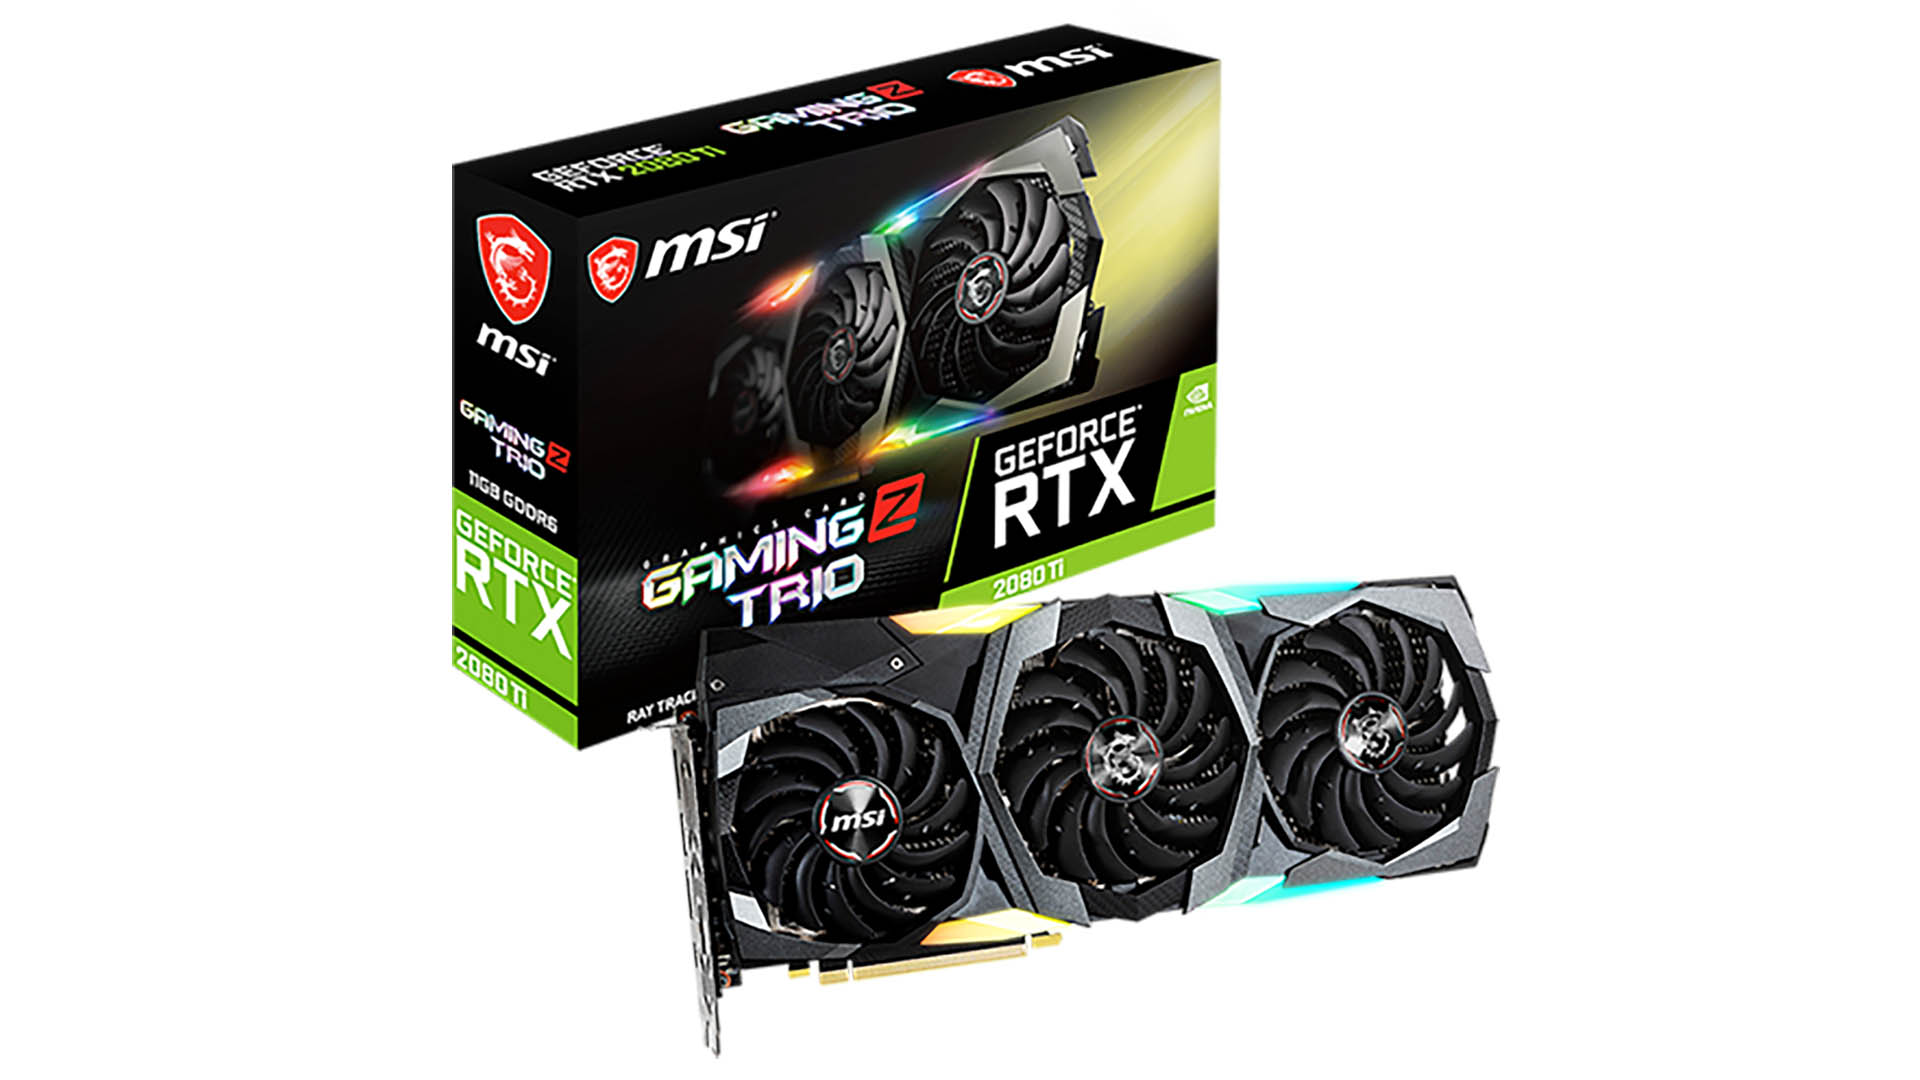 The new MSI RTX 2080 Ti gets 16Gbps memory and a shot at Nvidia's Titan RTX